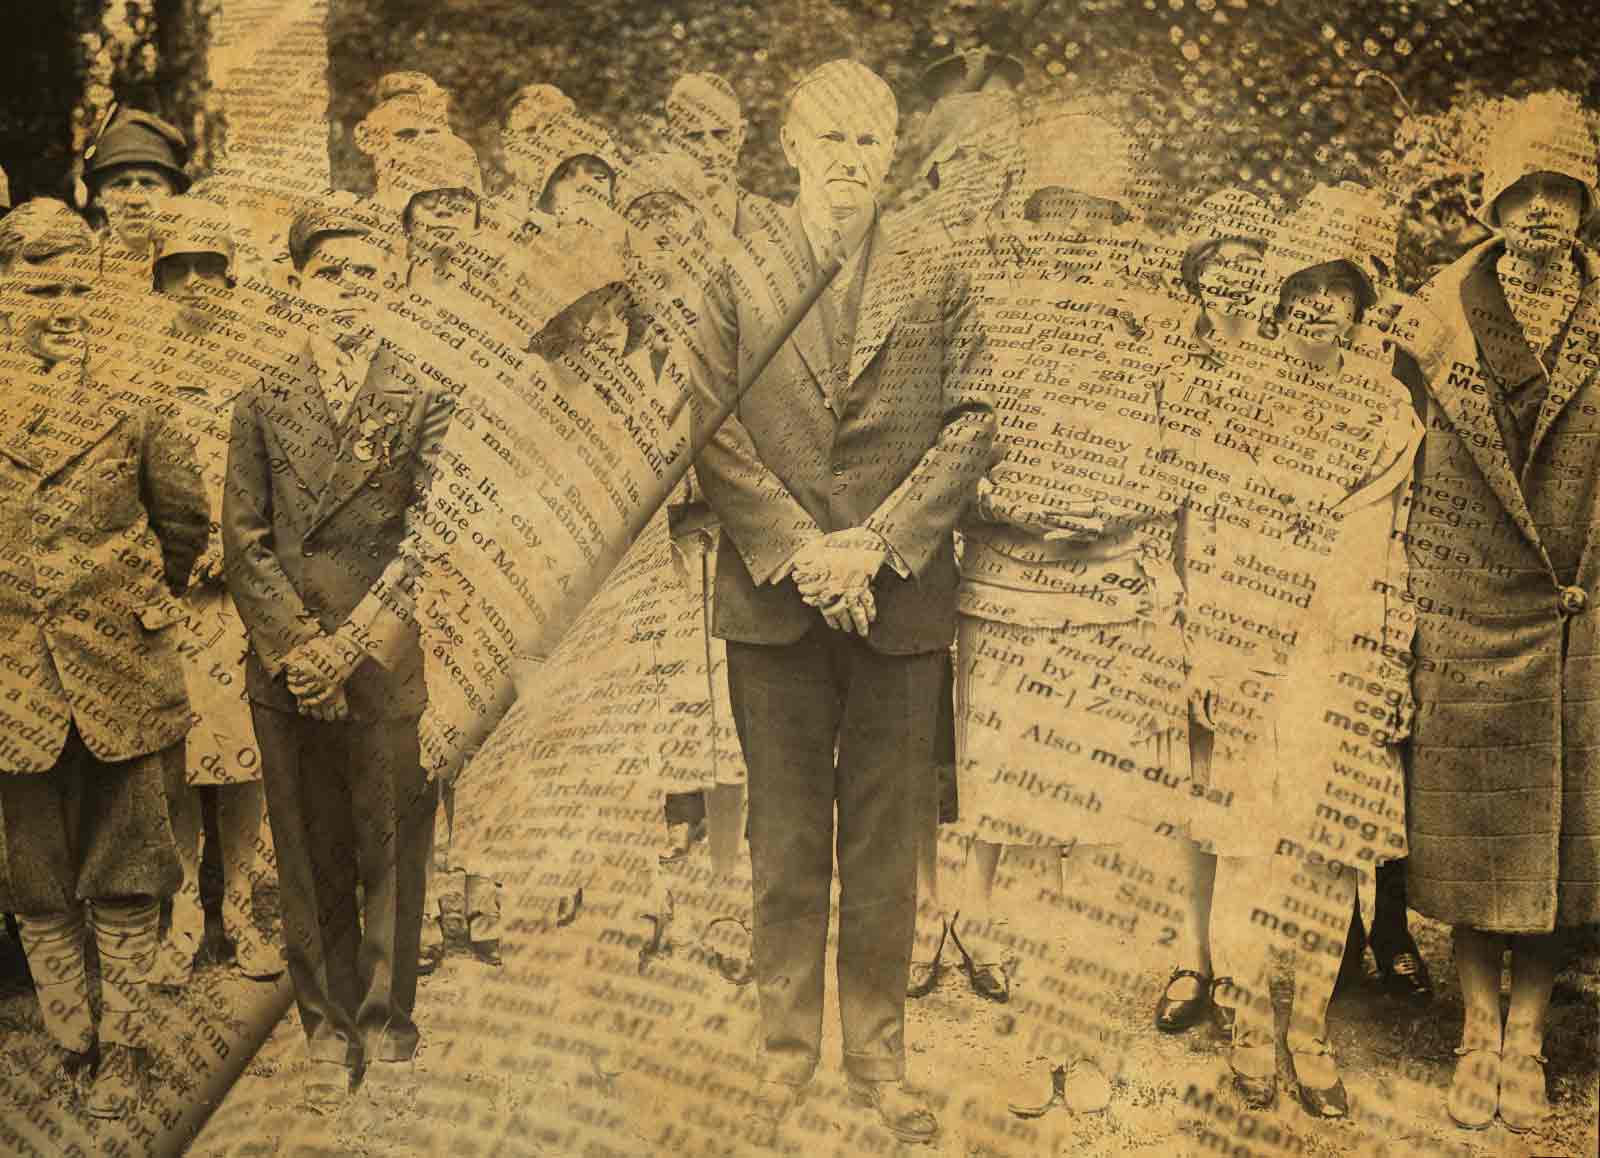 Black and white photo of Calvin Coolidge and some students with overlay of dictionary pages.